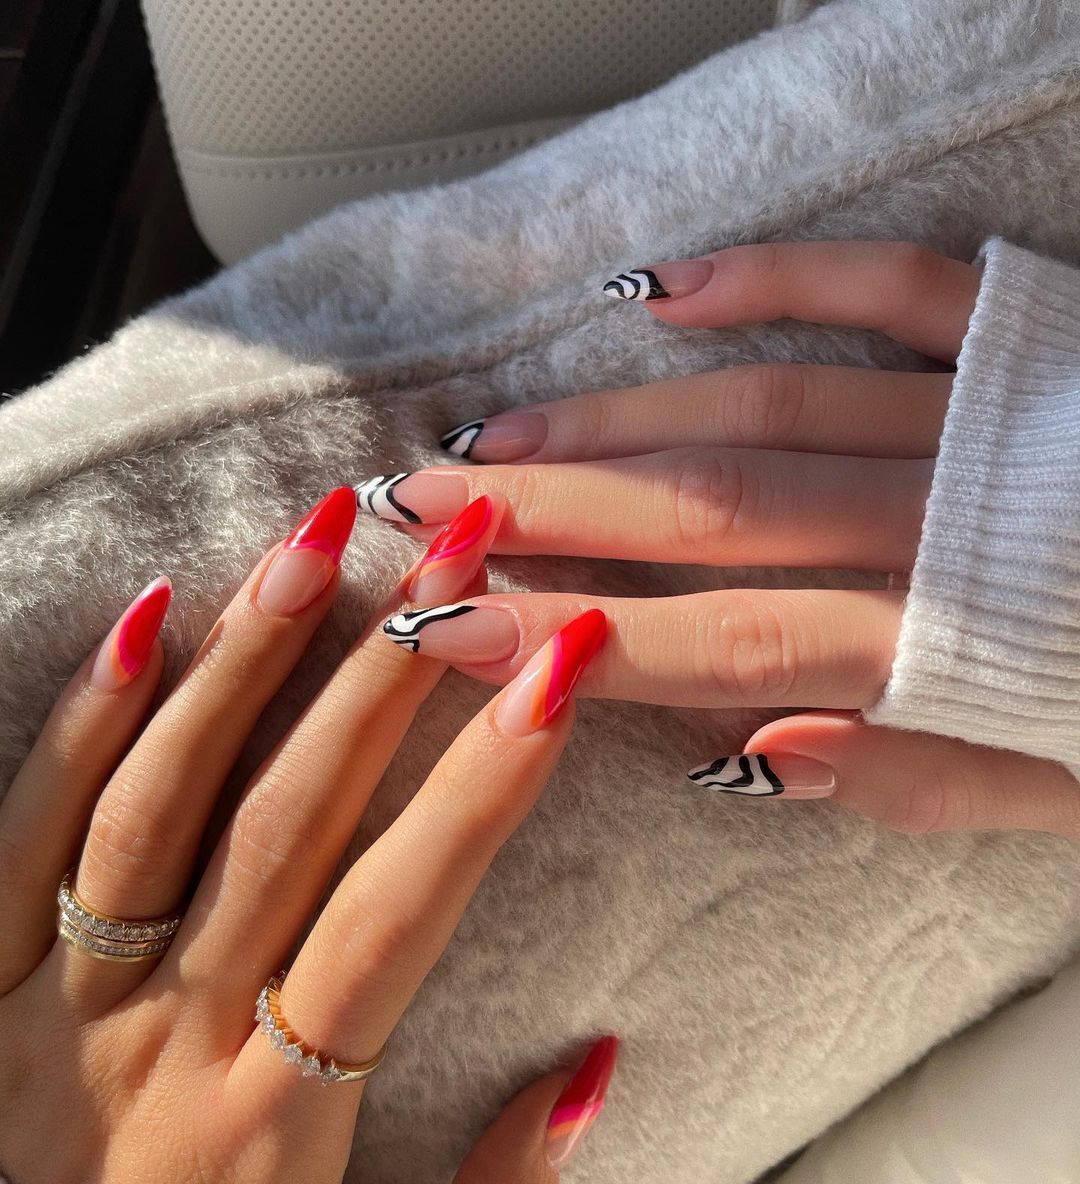 Affordable Nail Salons in Singapore for a Manicure and Pedicure